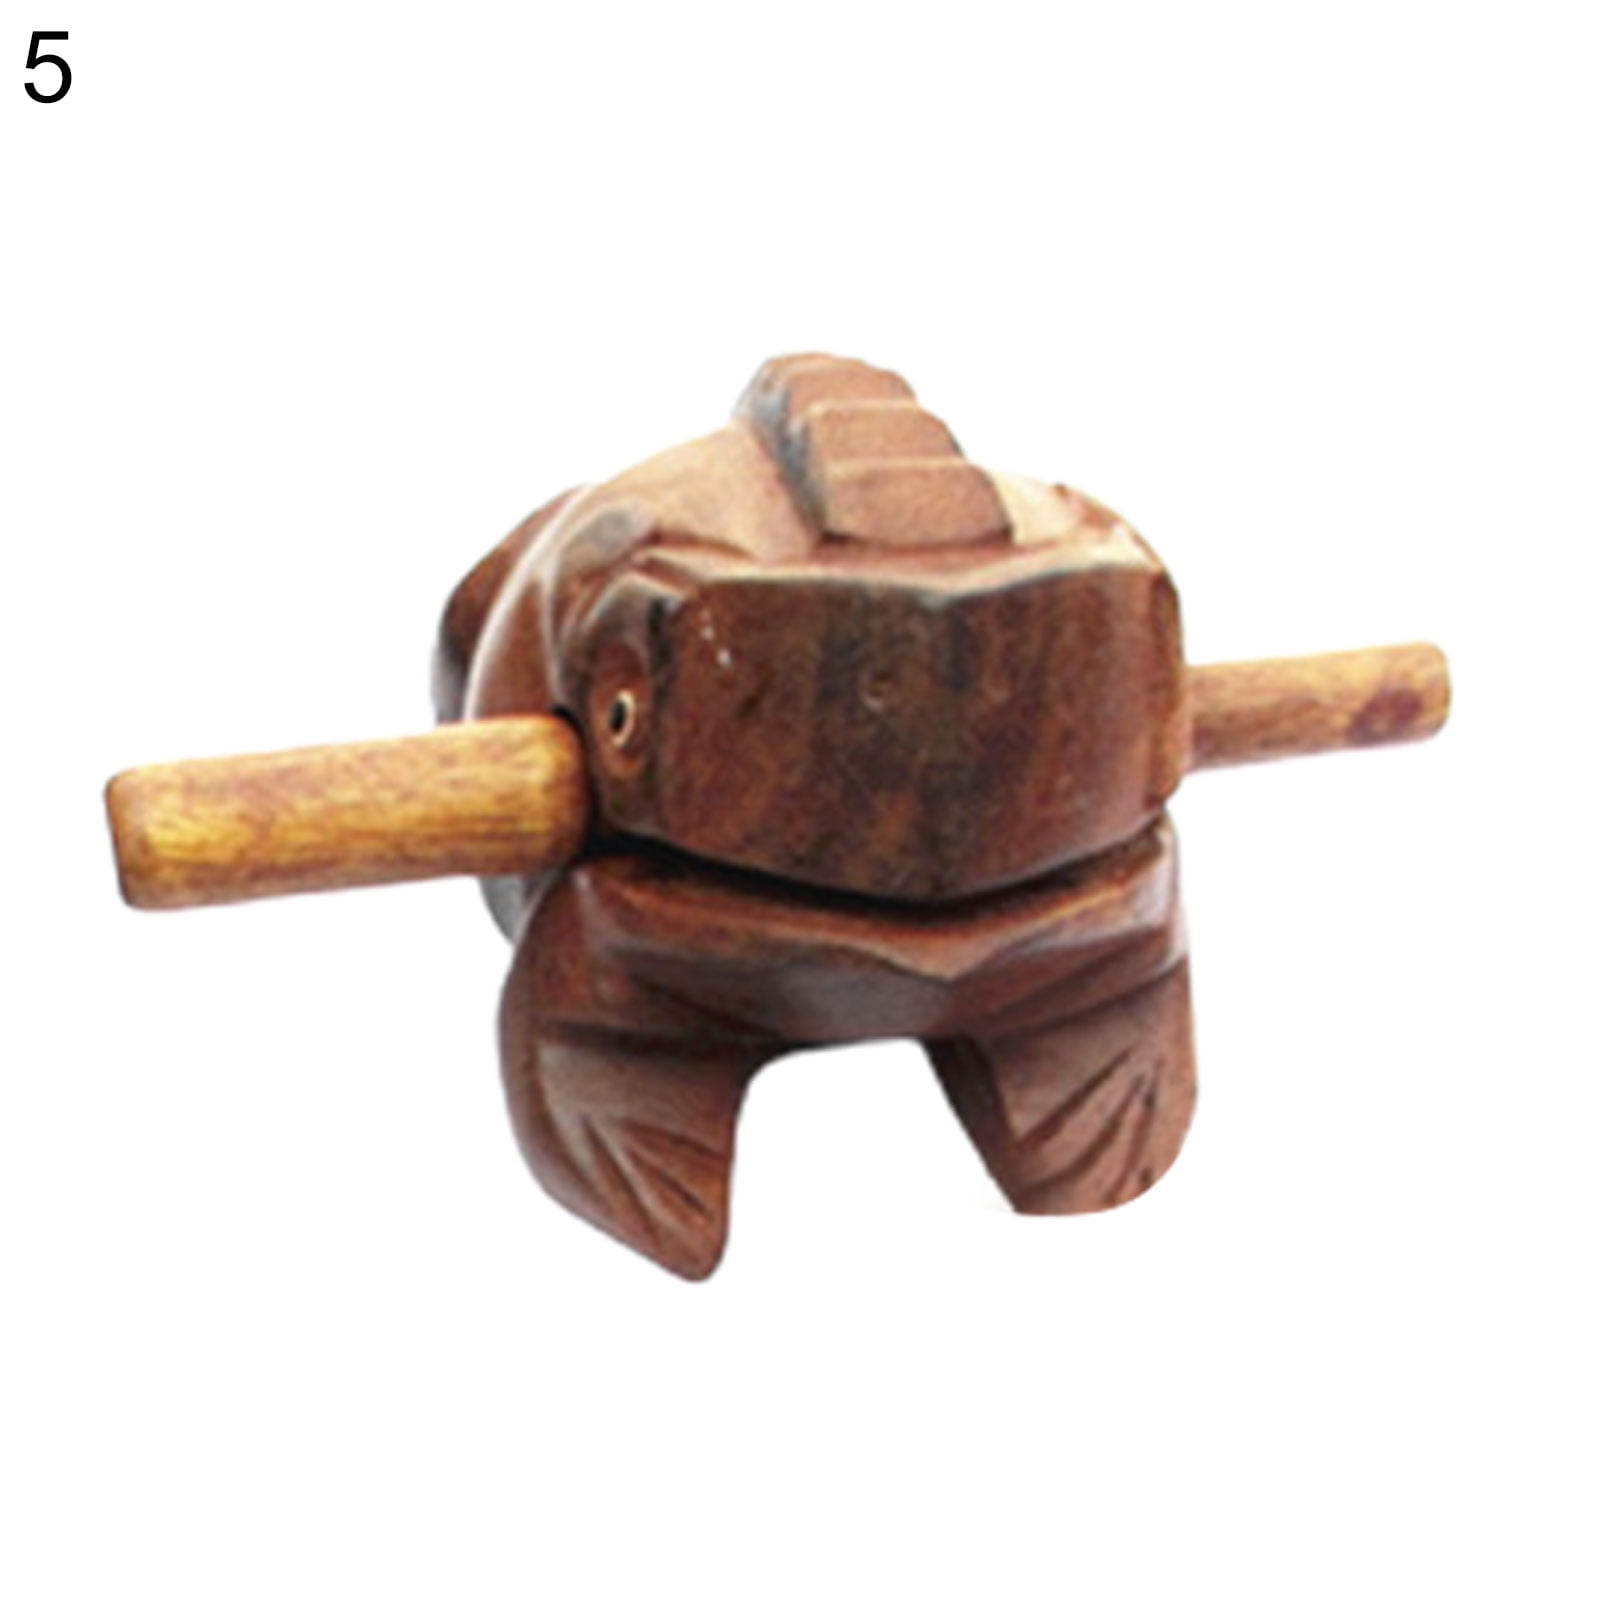 AMOYER 1pc Hand Carved Wooden Lucky Frog Croaking Musical Instrument Tone Block Musical Instrument Art Figurines Decorative Home Miniatures Gift 